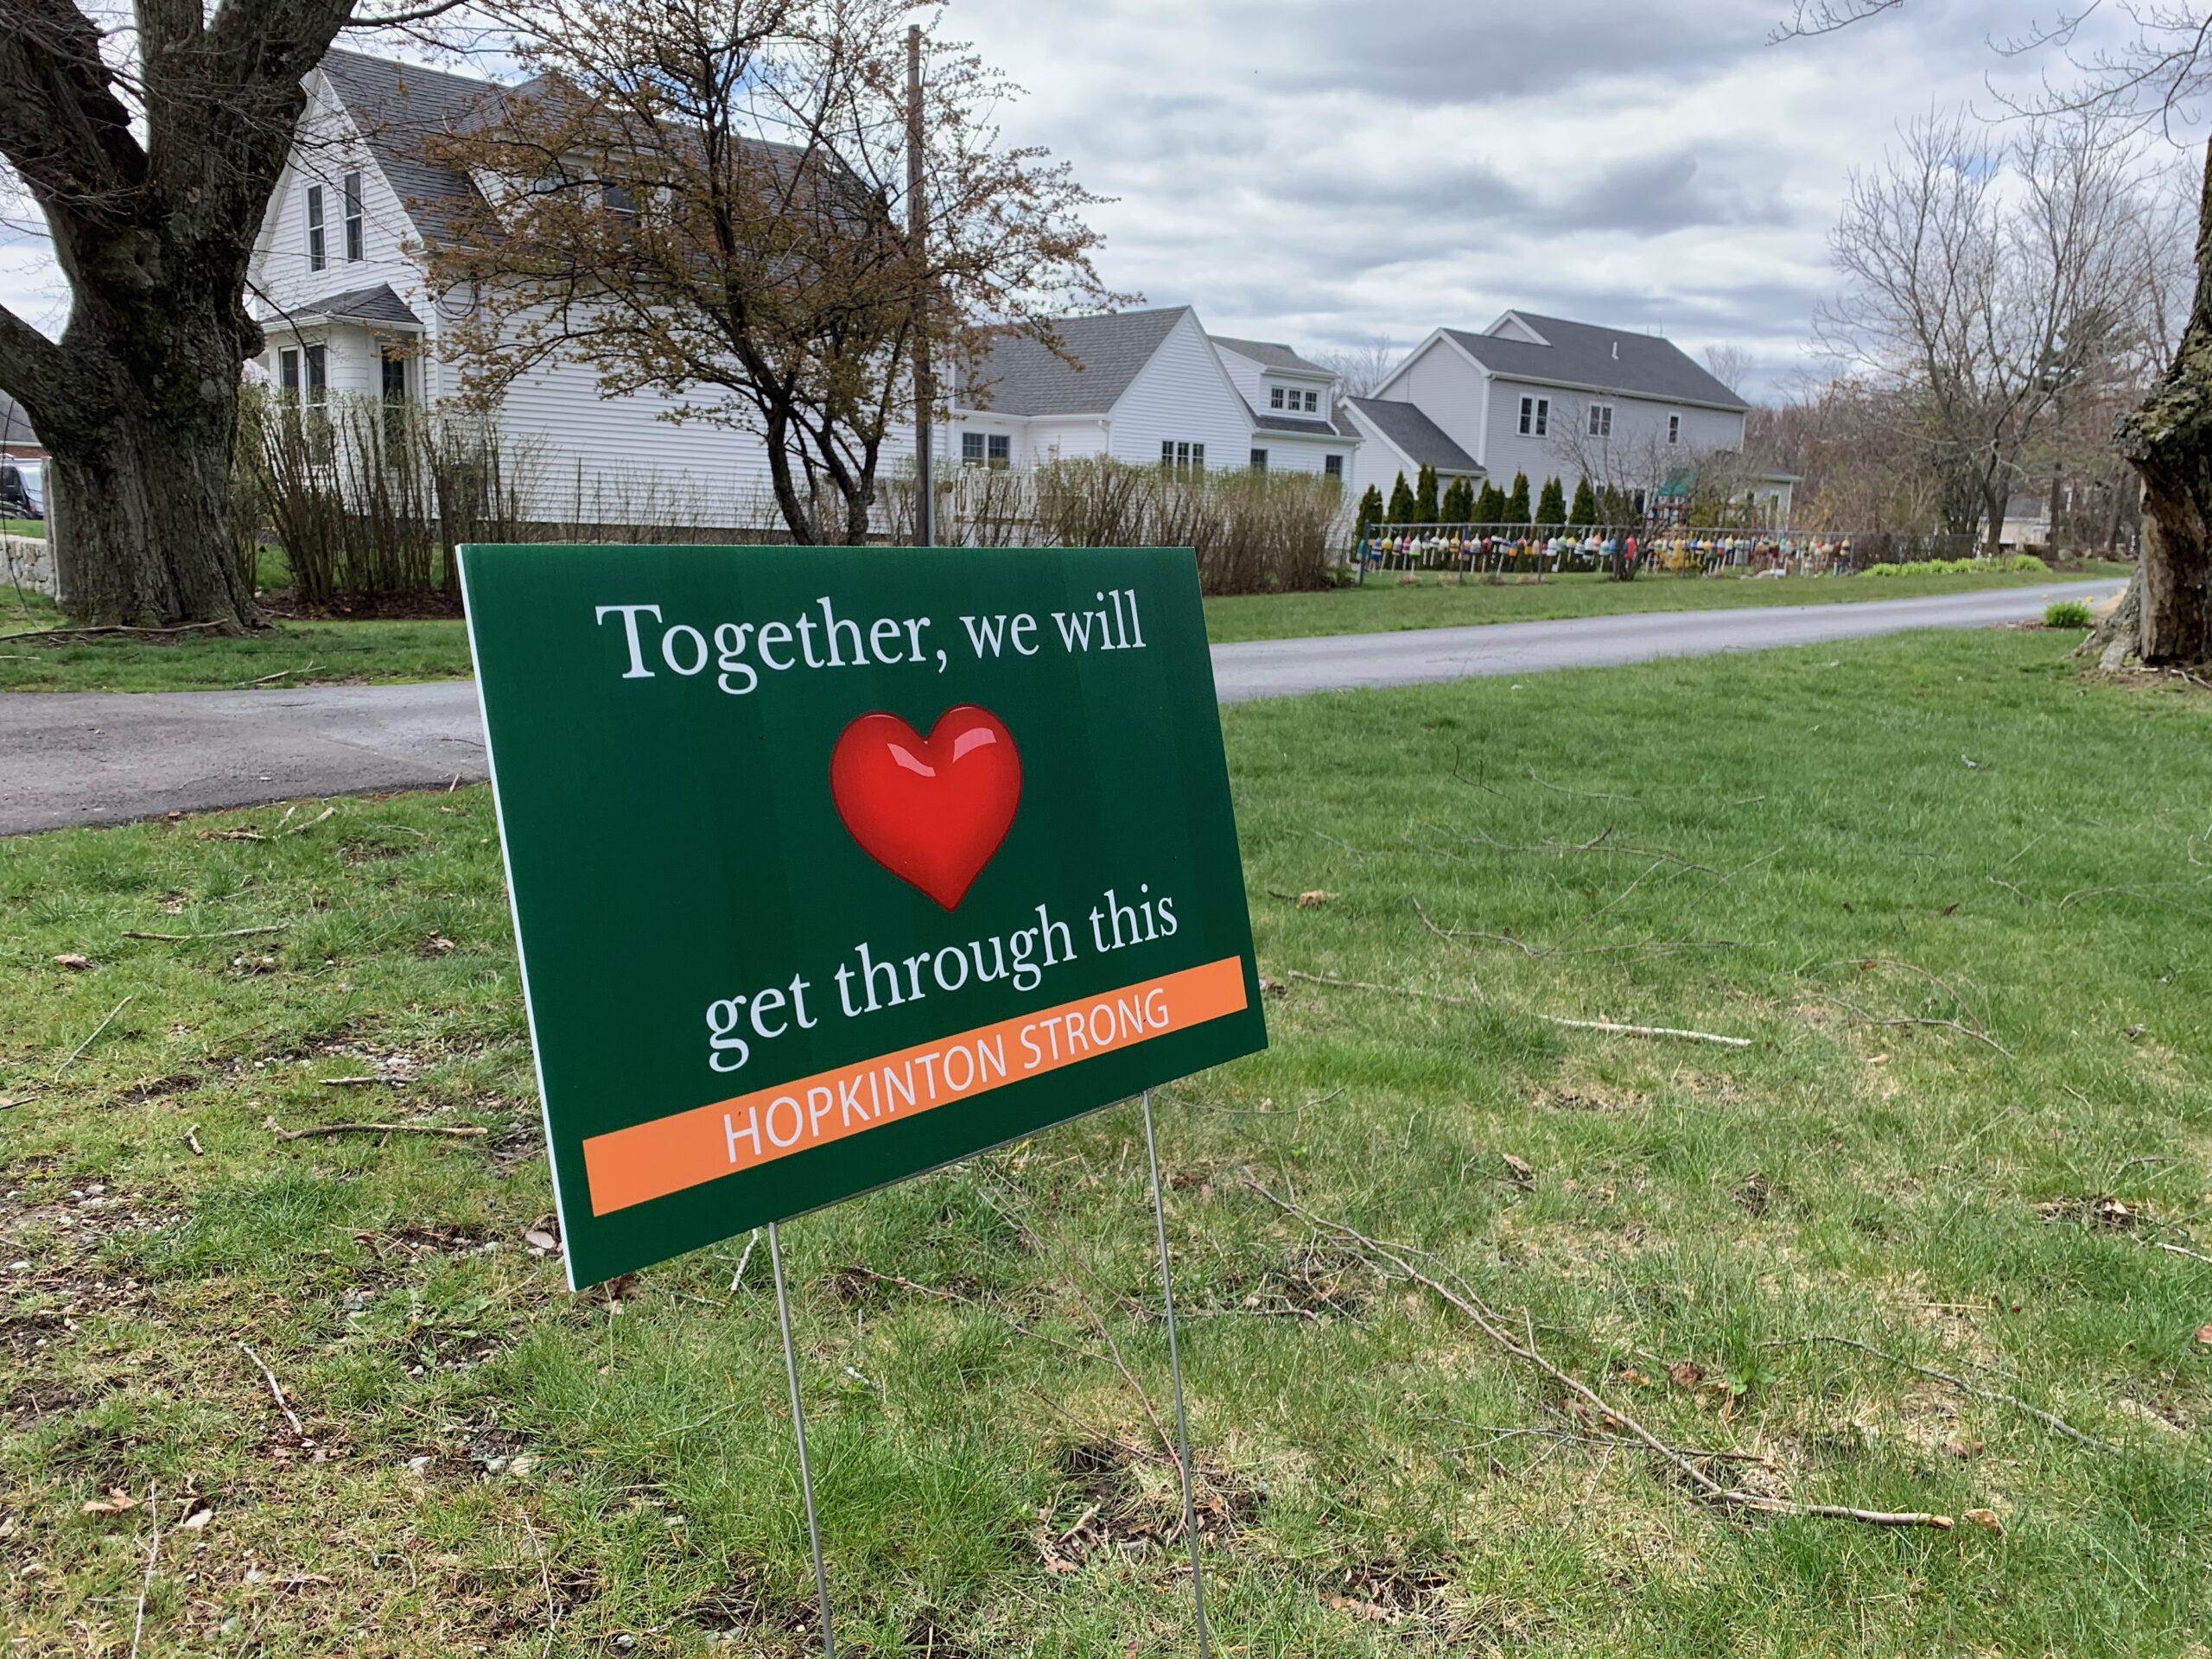 Residents asked to review yard sign regulations